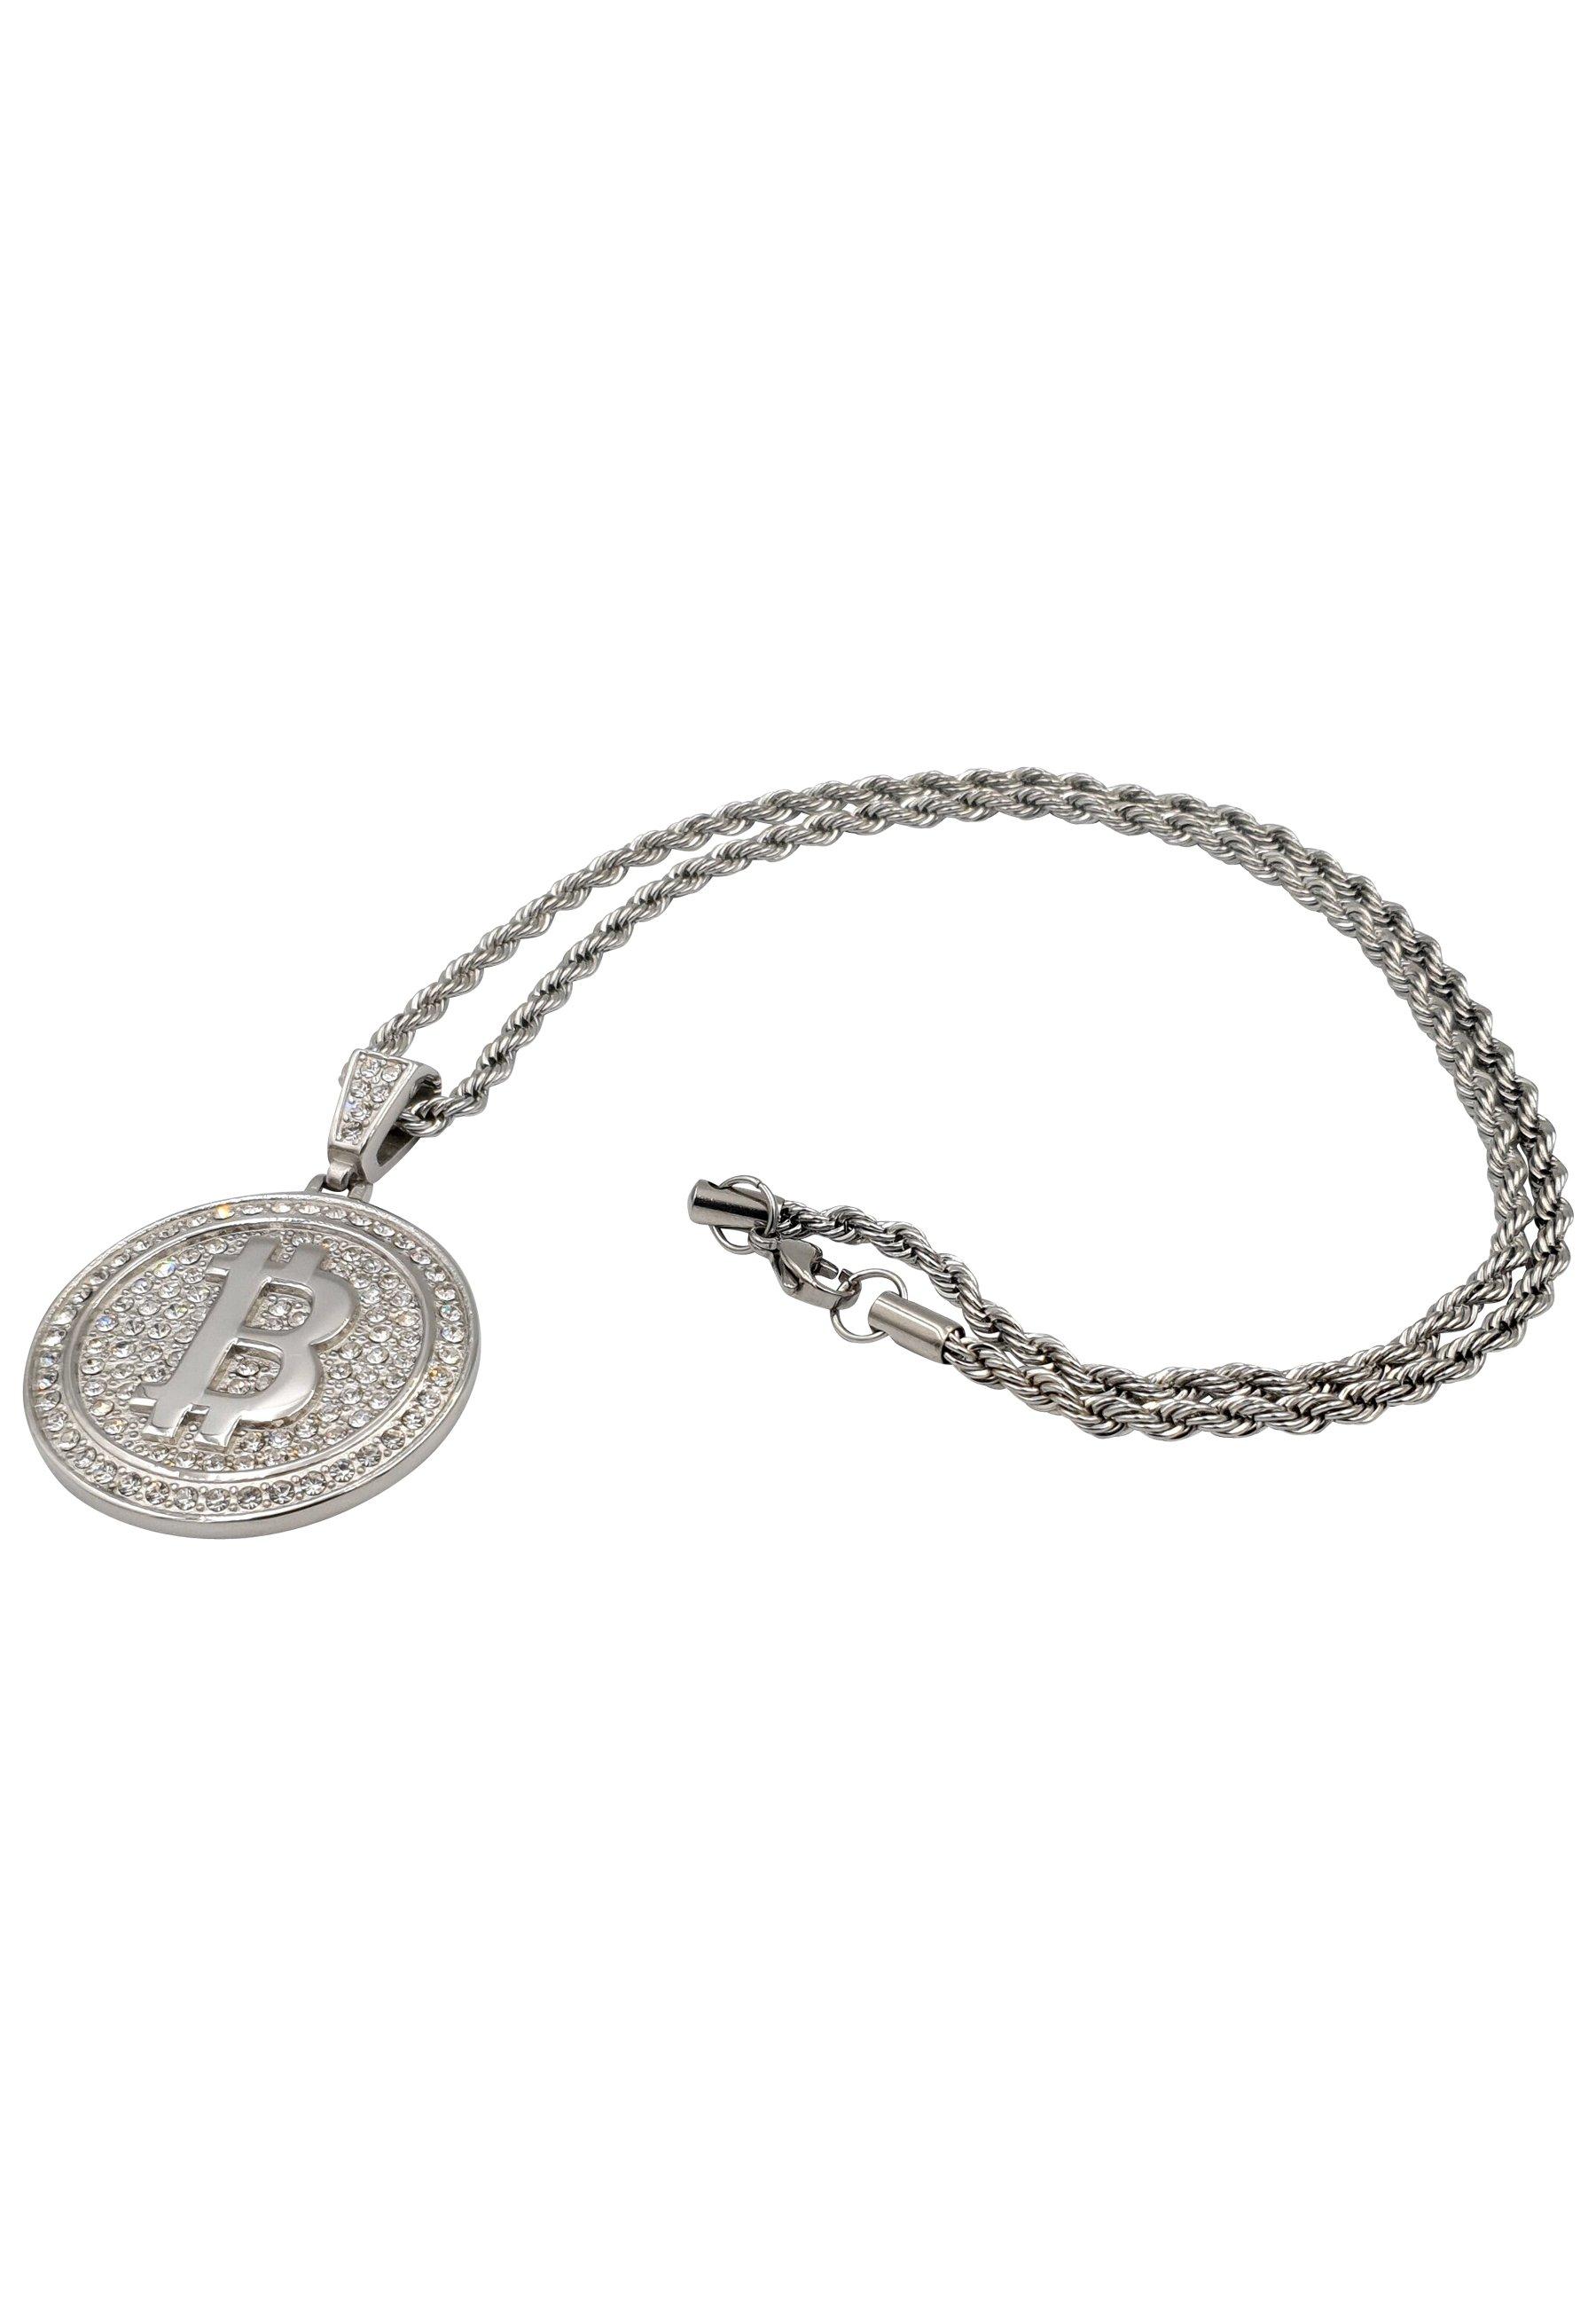 HEBE JEWELS  Bitcoin Kette, HIP-HOP-STYLE 